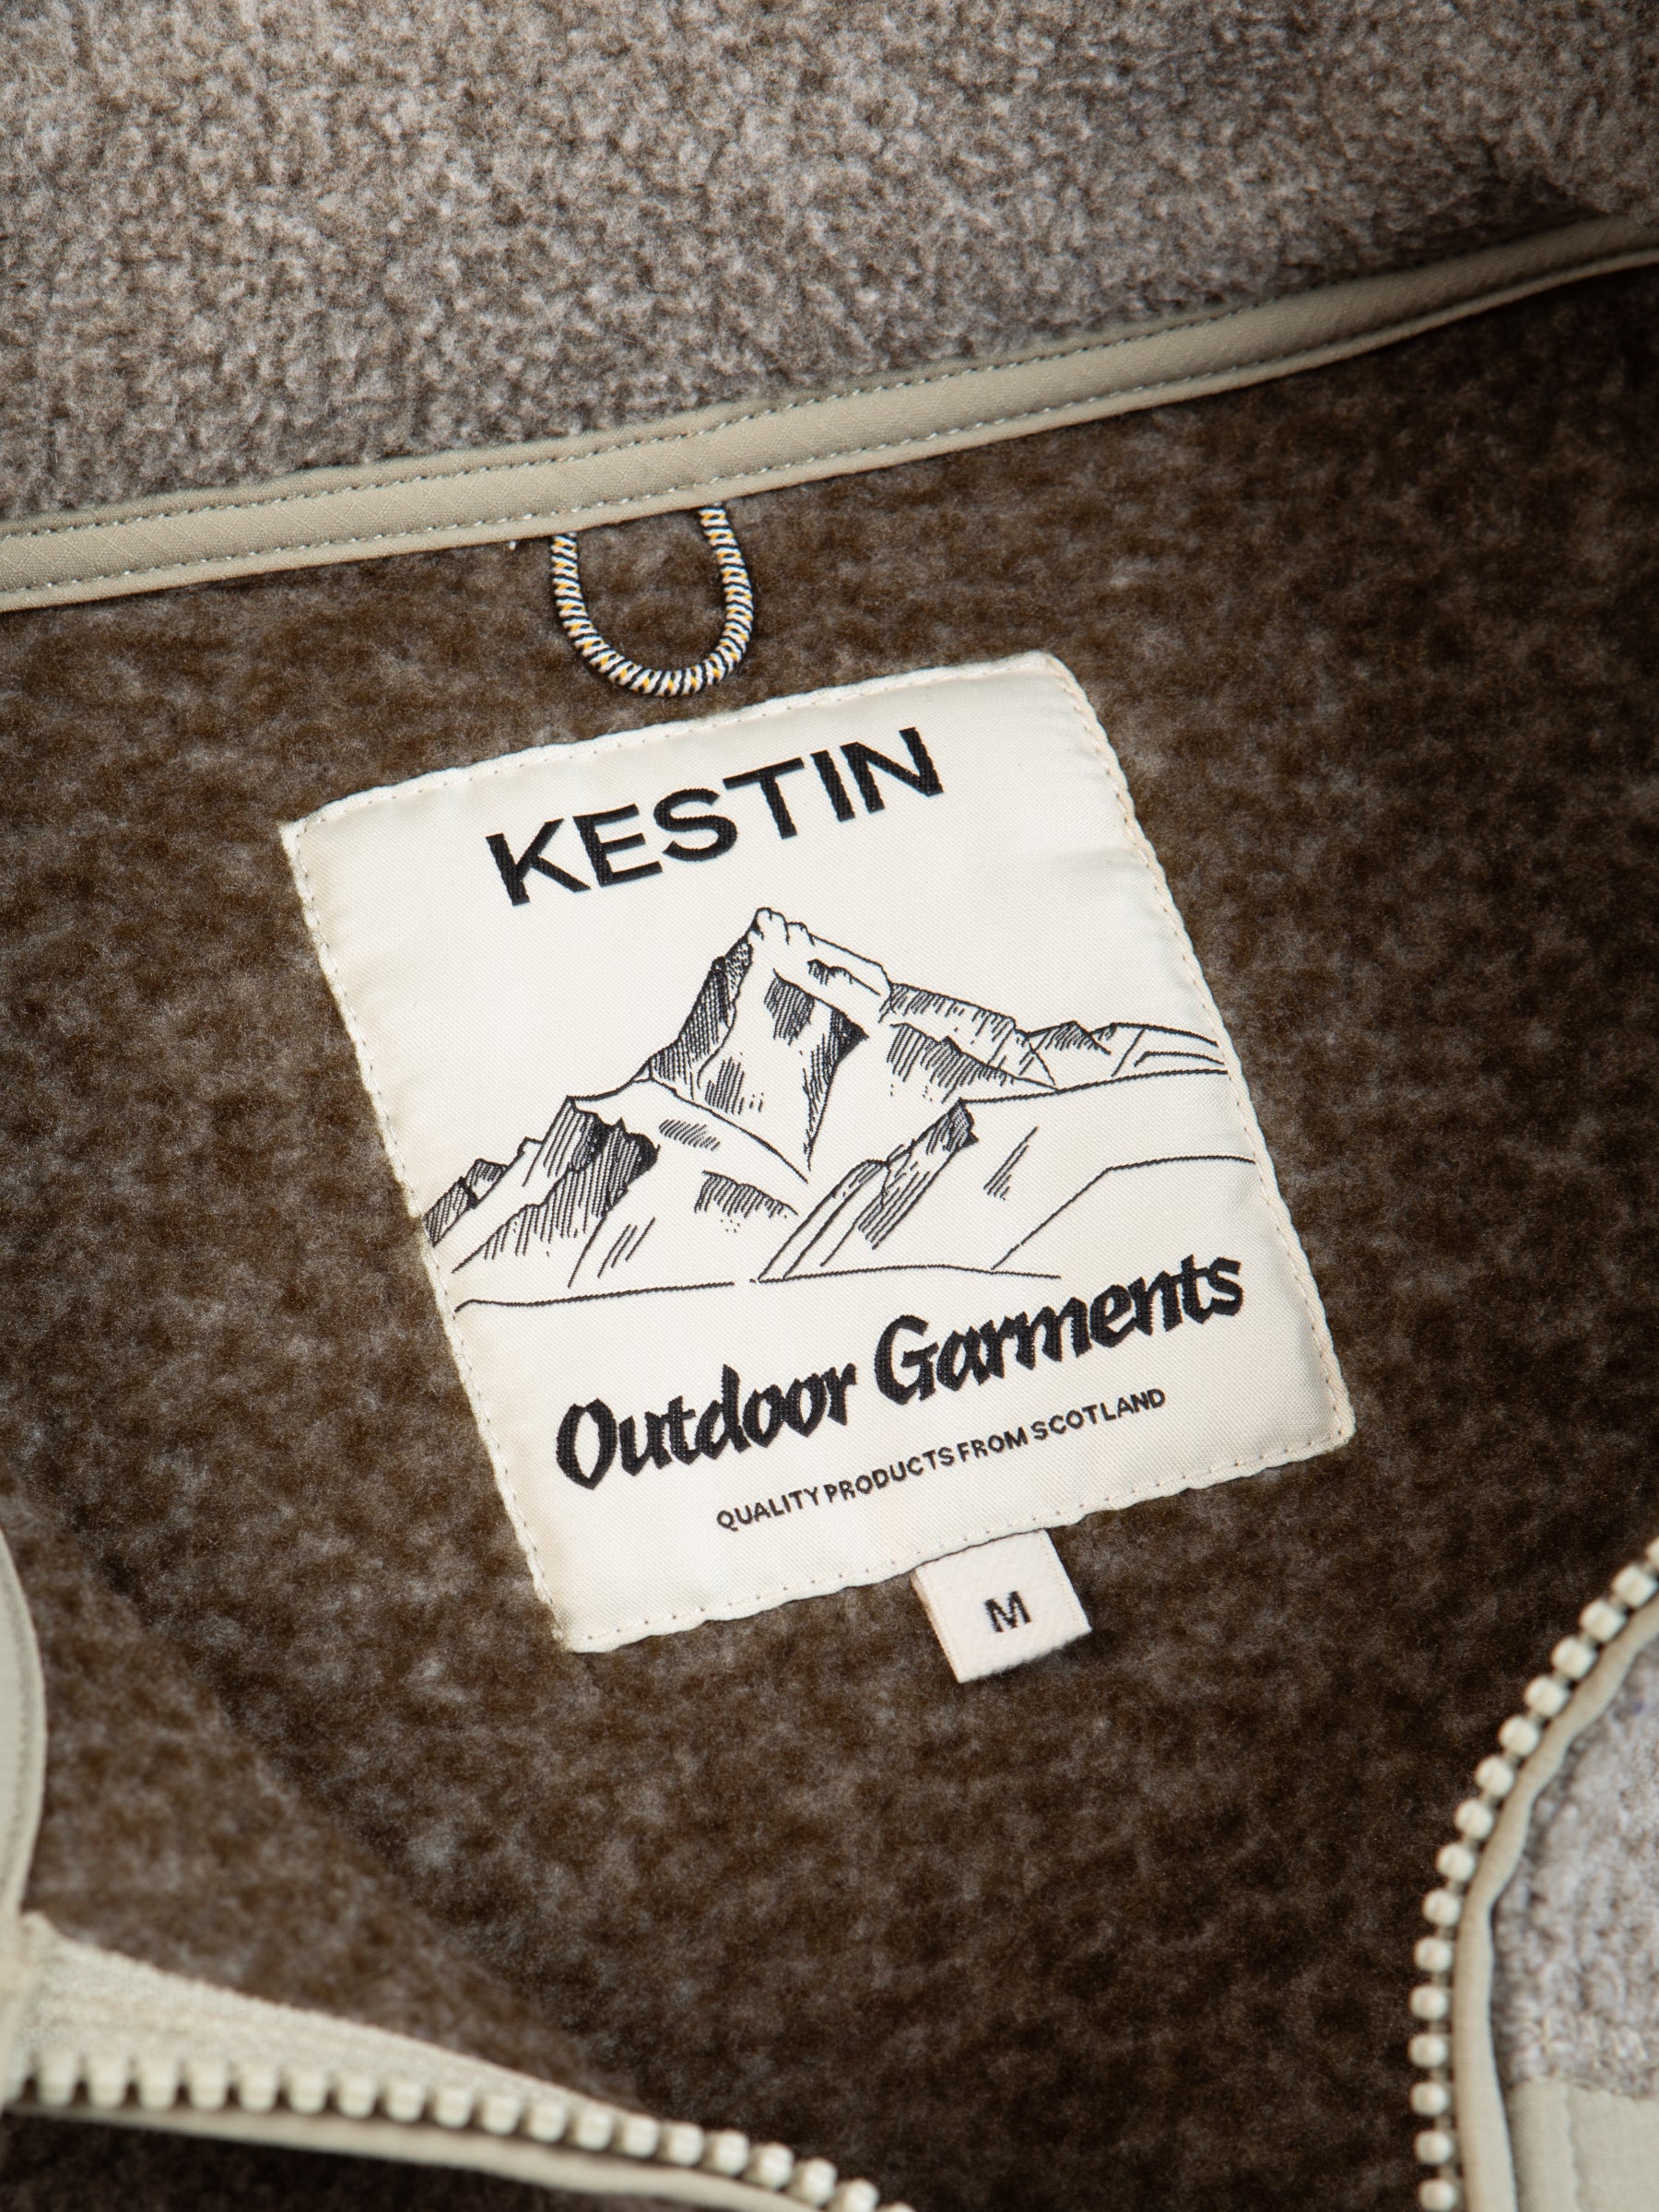 A KESTIN Outdoor Garments neck label sewn to a recycled fleece material.